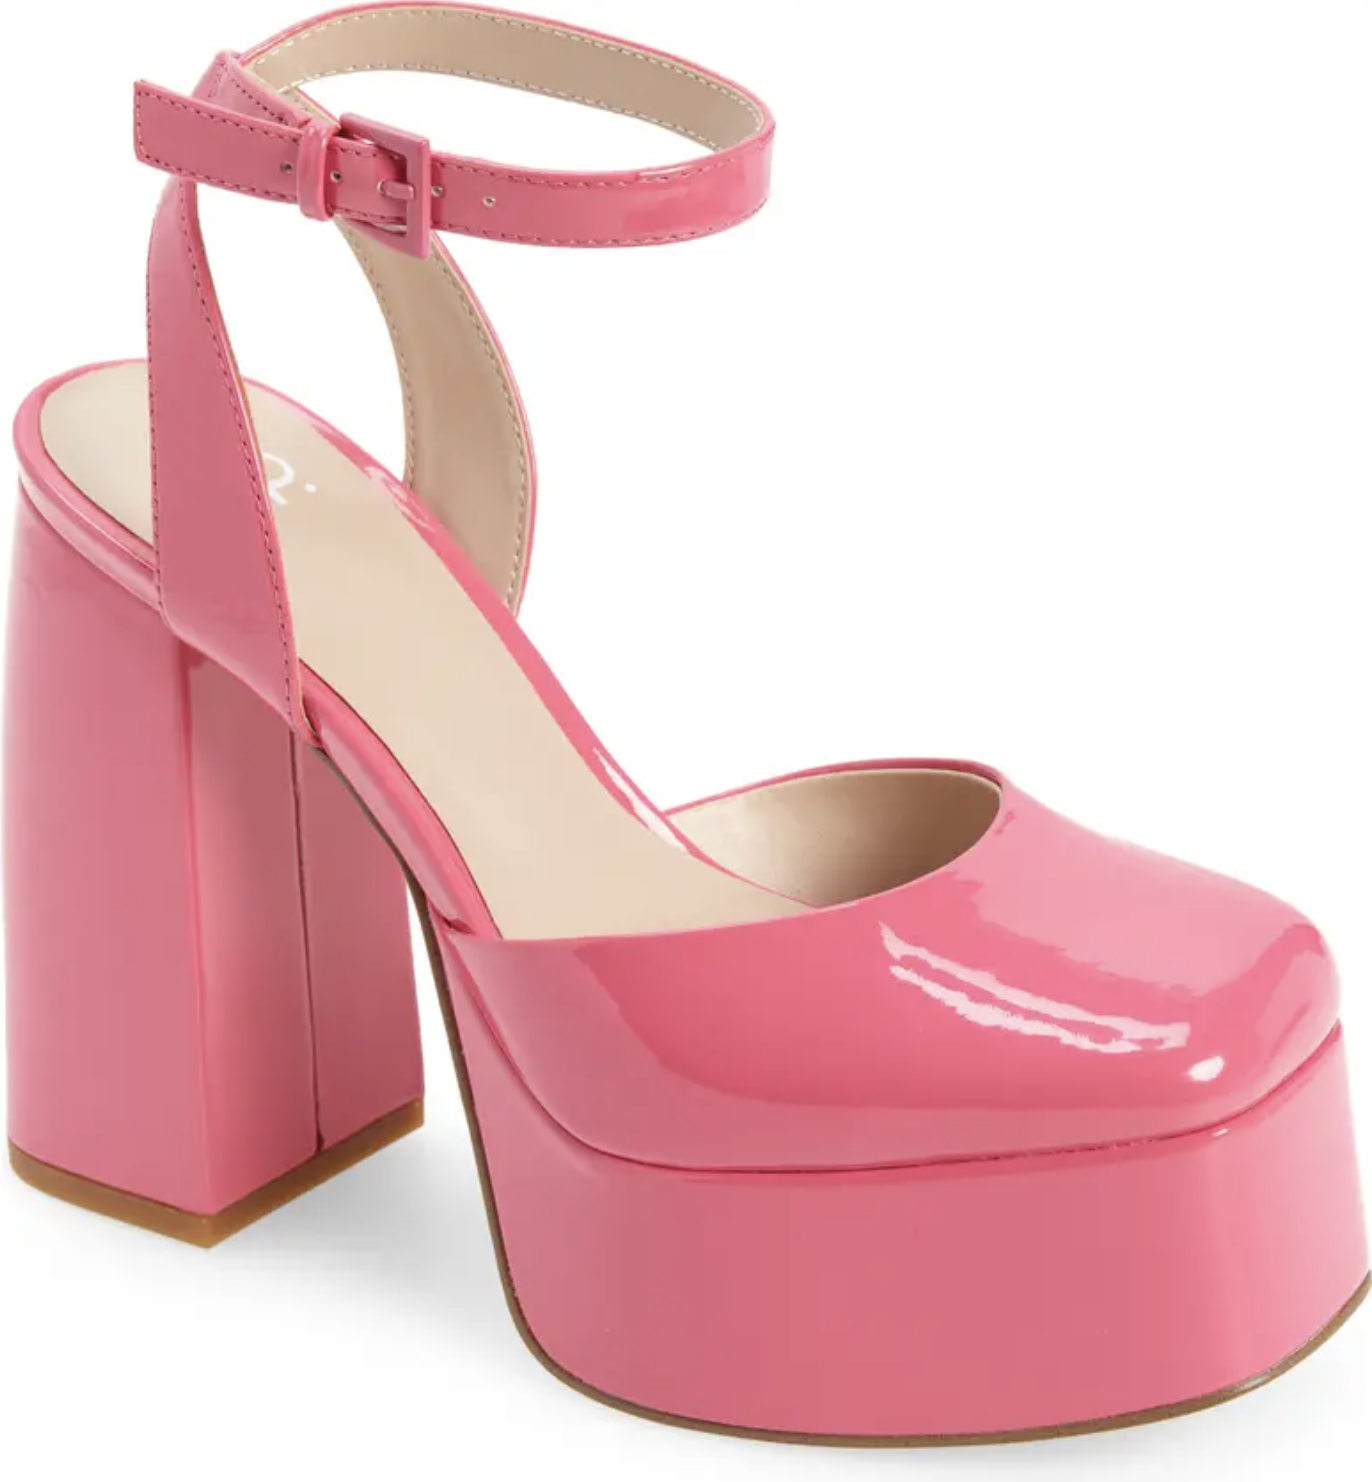 the pink pumps